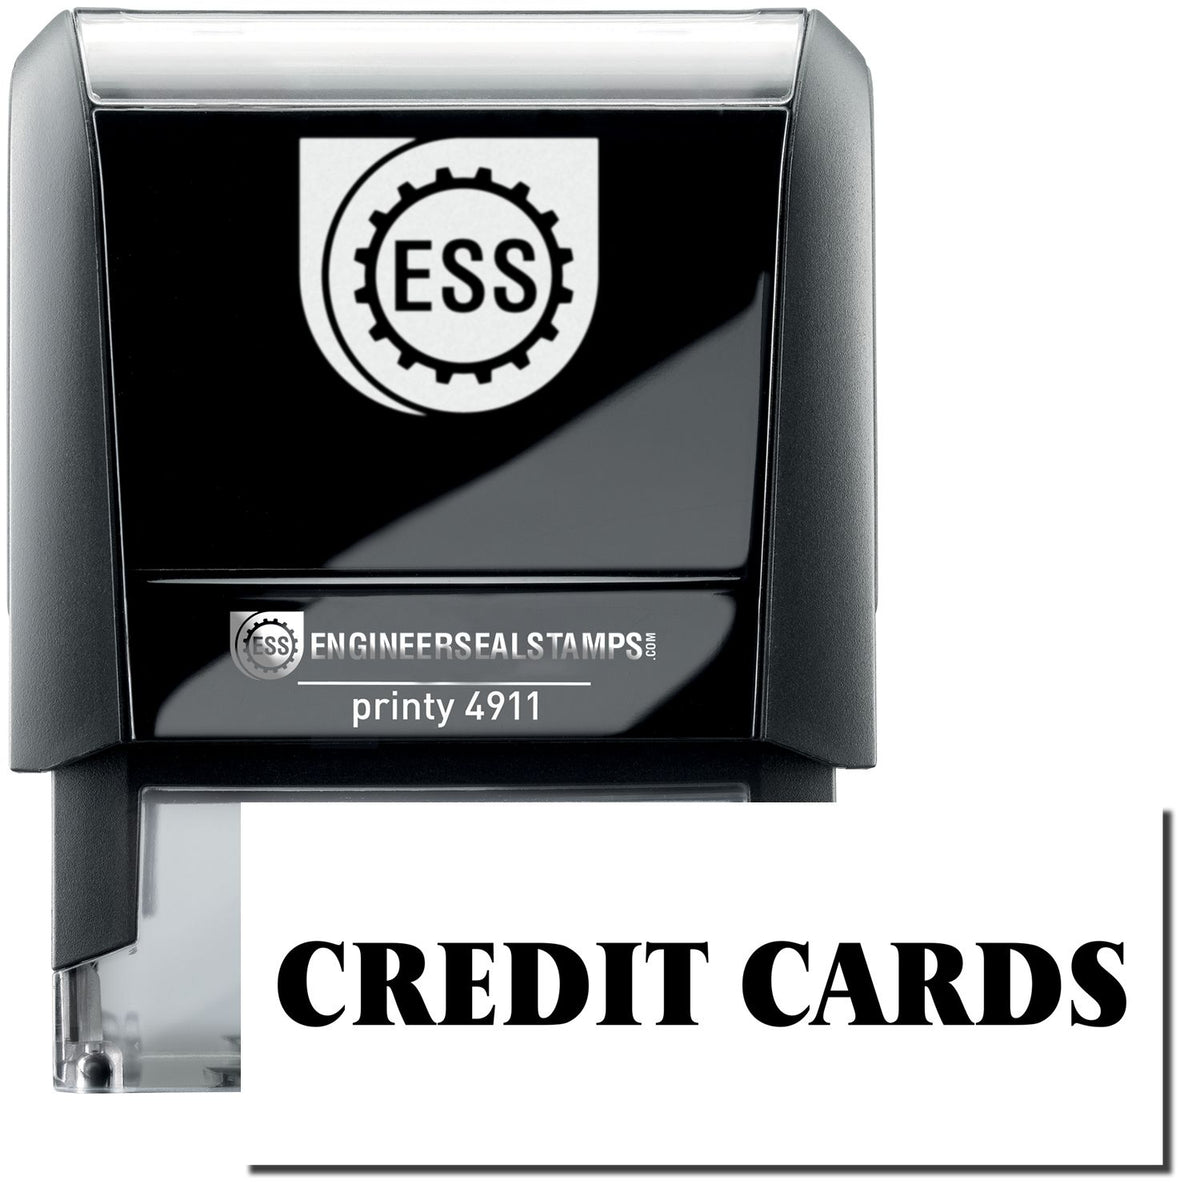 A self-inking stamp with a stamped image showing how the text &quot;CREDIT CARDS&quot; is displayed after stamping.